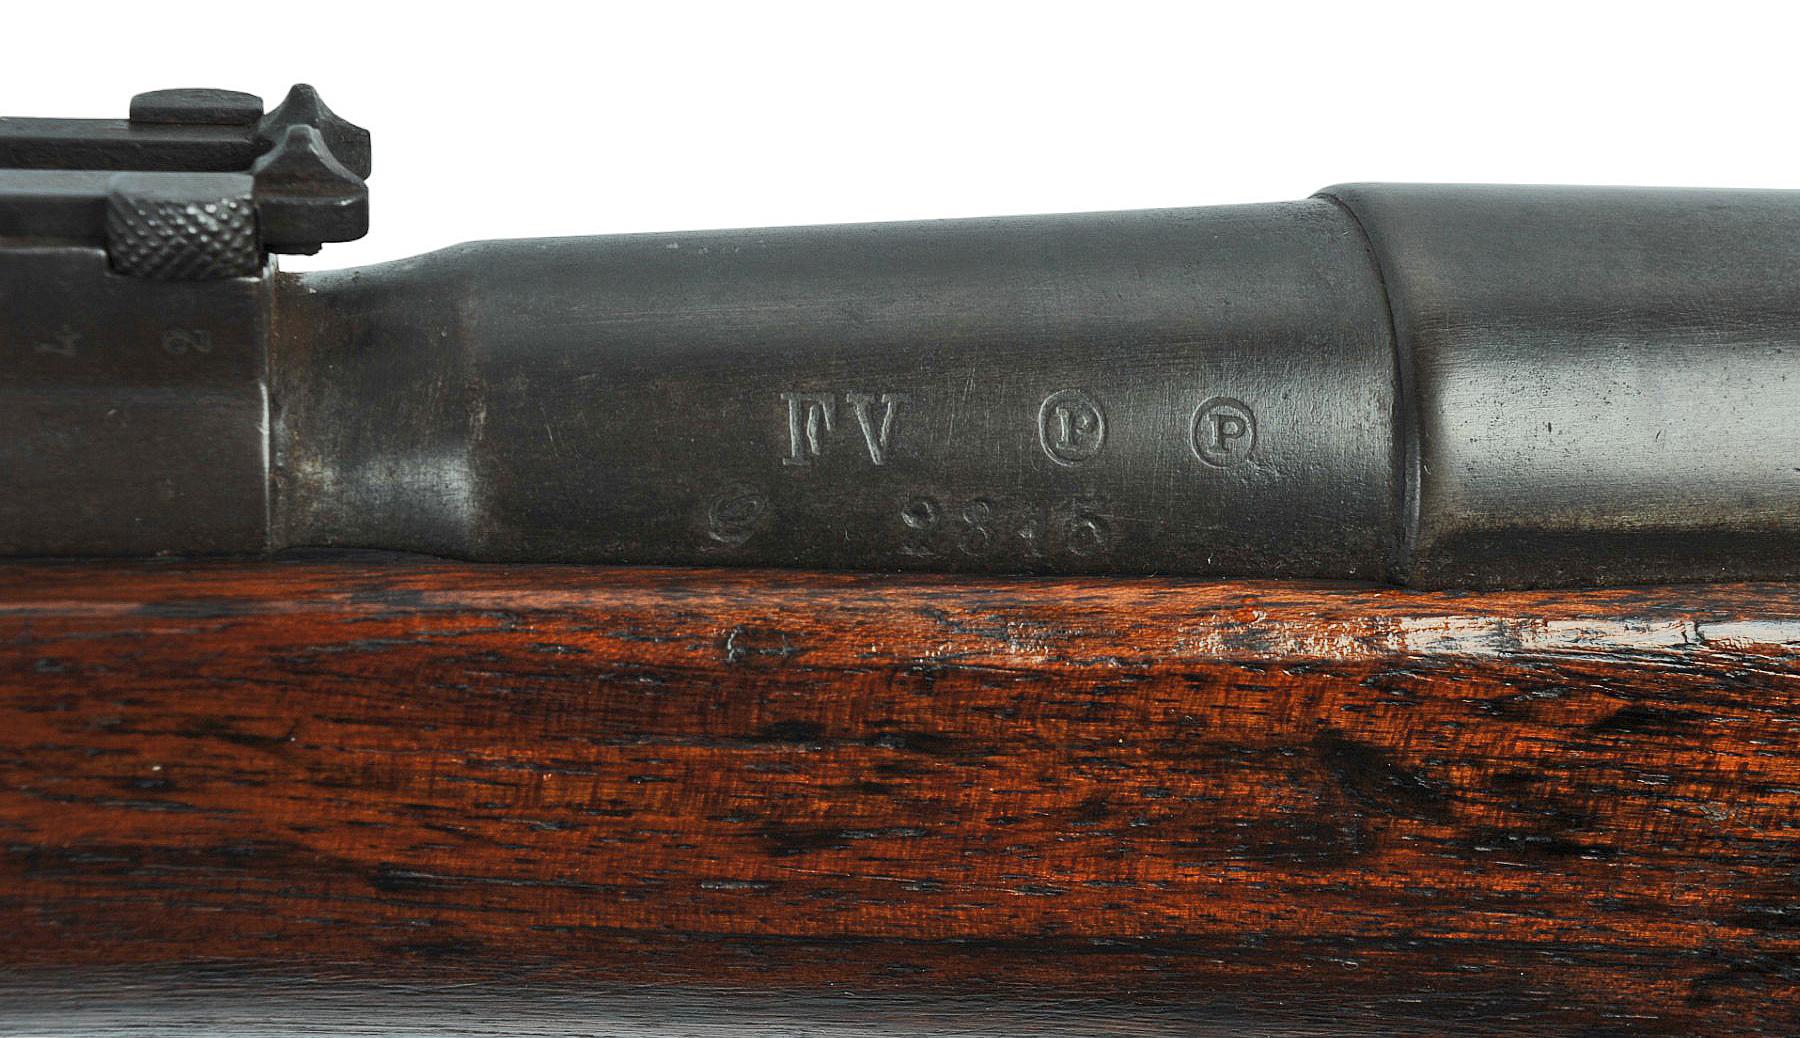 Rare Early French Military WWI era M1890 8mm Berthier Cavalry Bolt-Action Carbine - FFL #2815 (HJJ1)